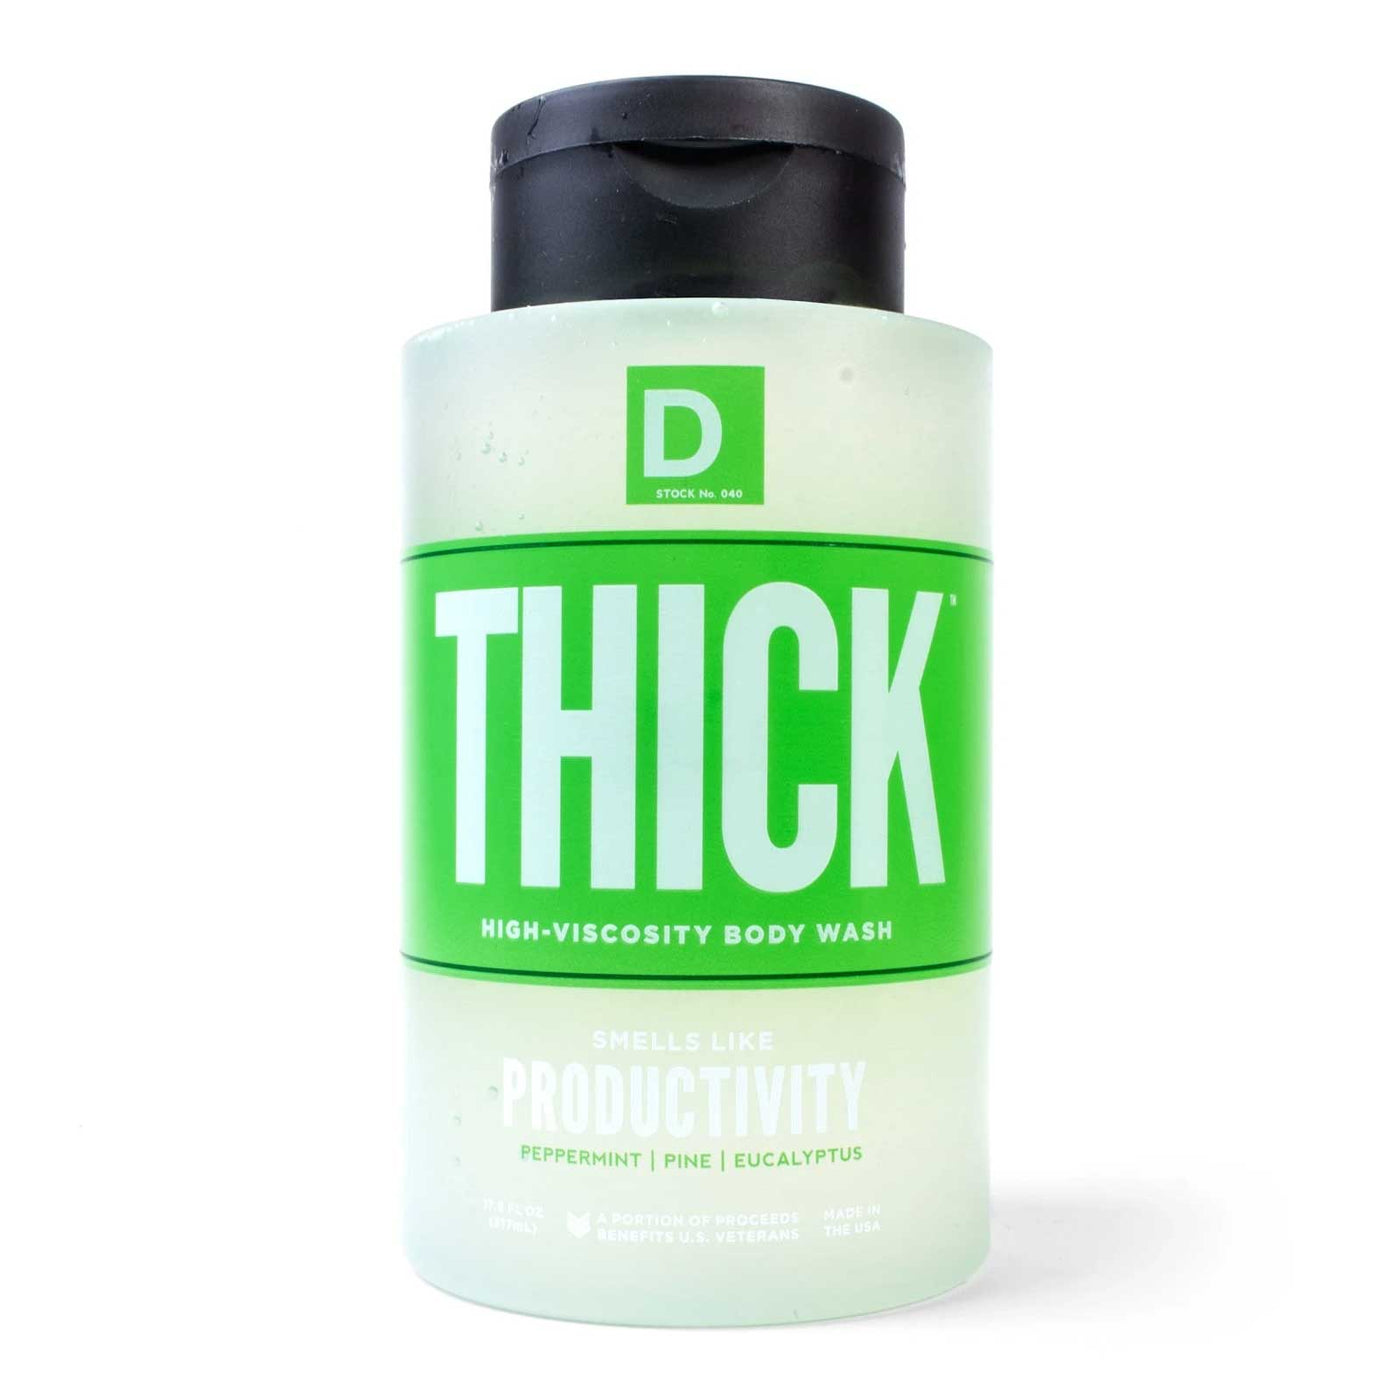 Thick Productivity Body Wash - Barque Gifts